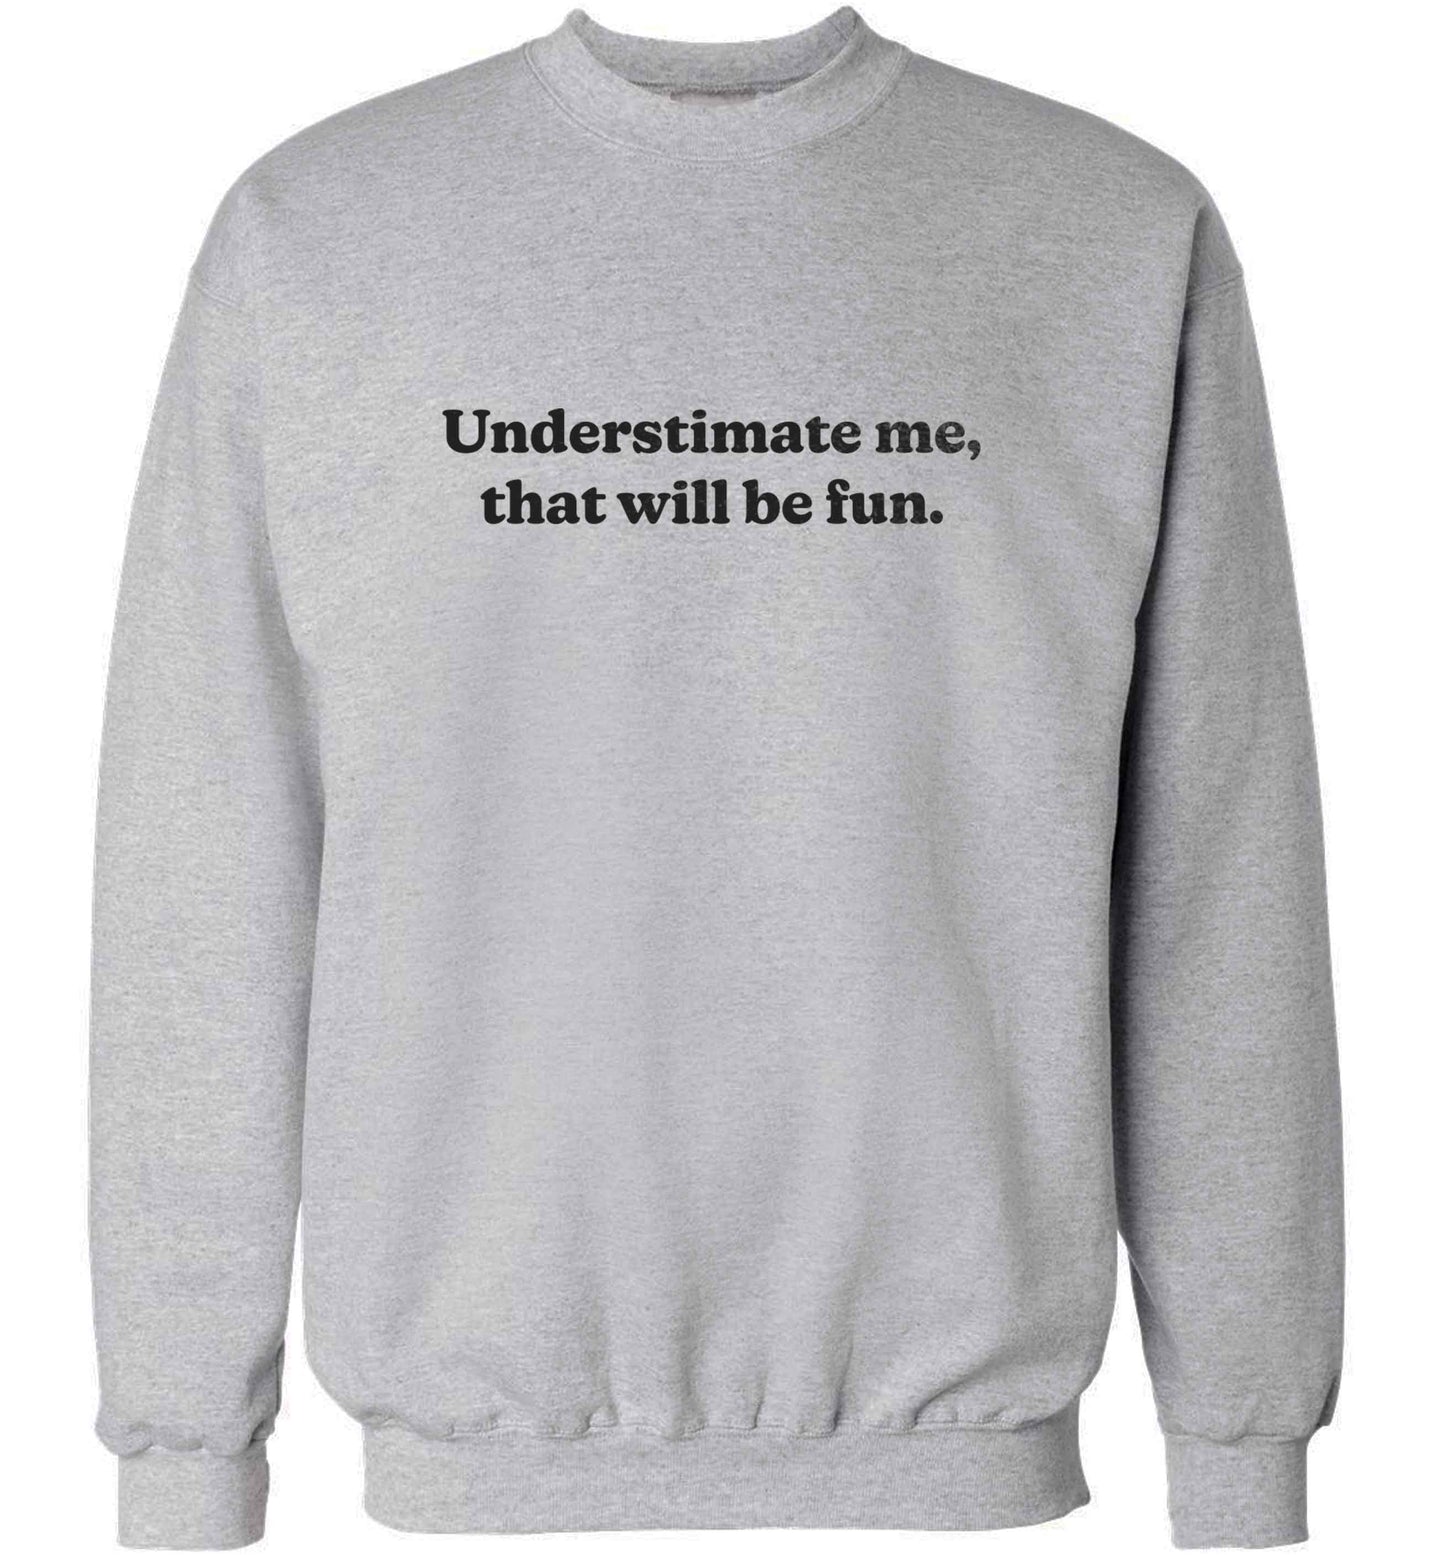 Underestimate me that will be fun adult's unisex grey sweater 2XL